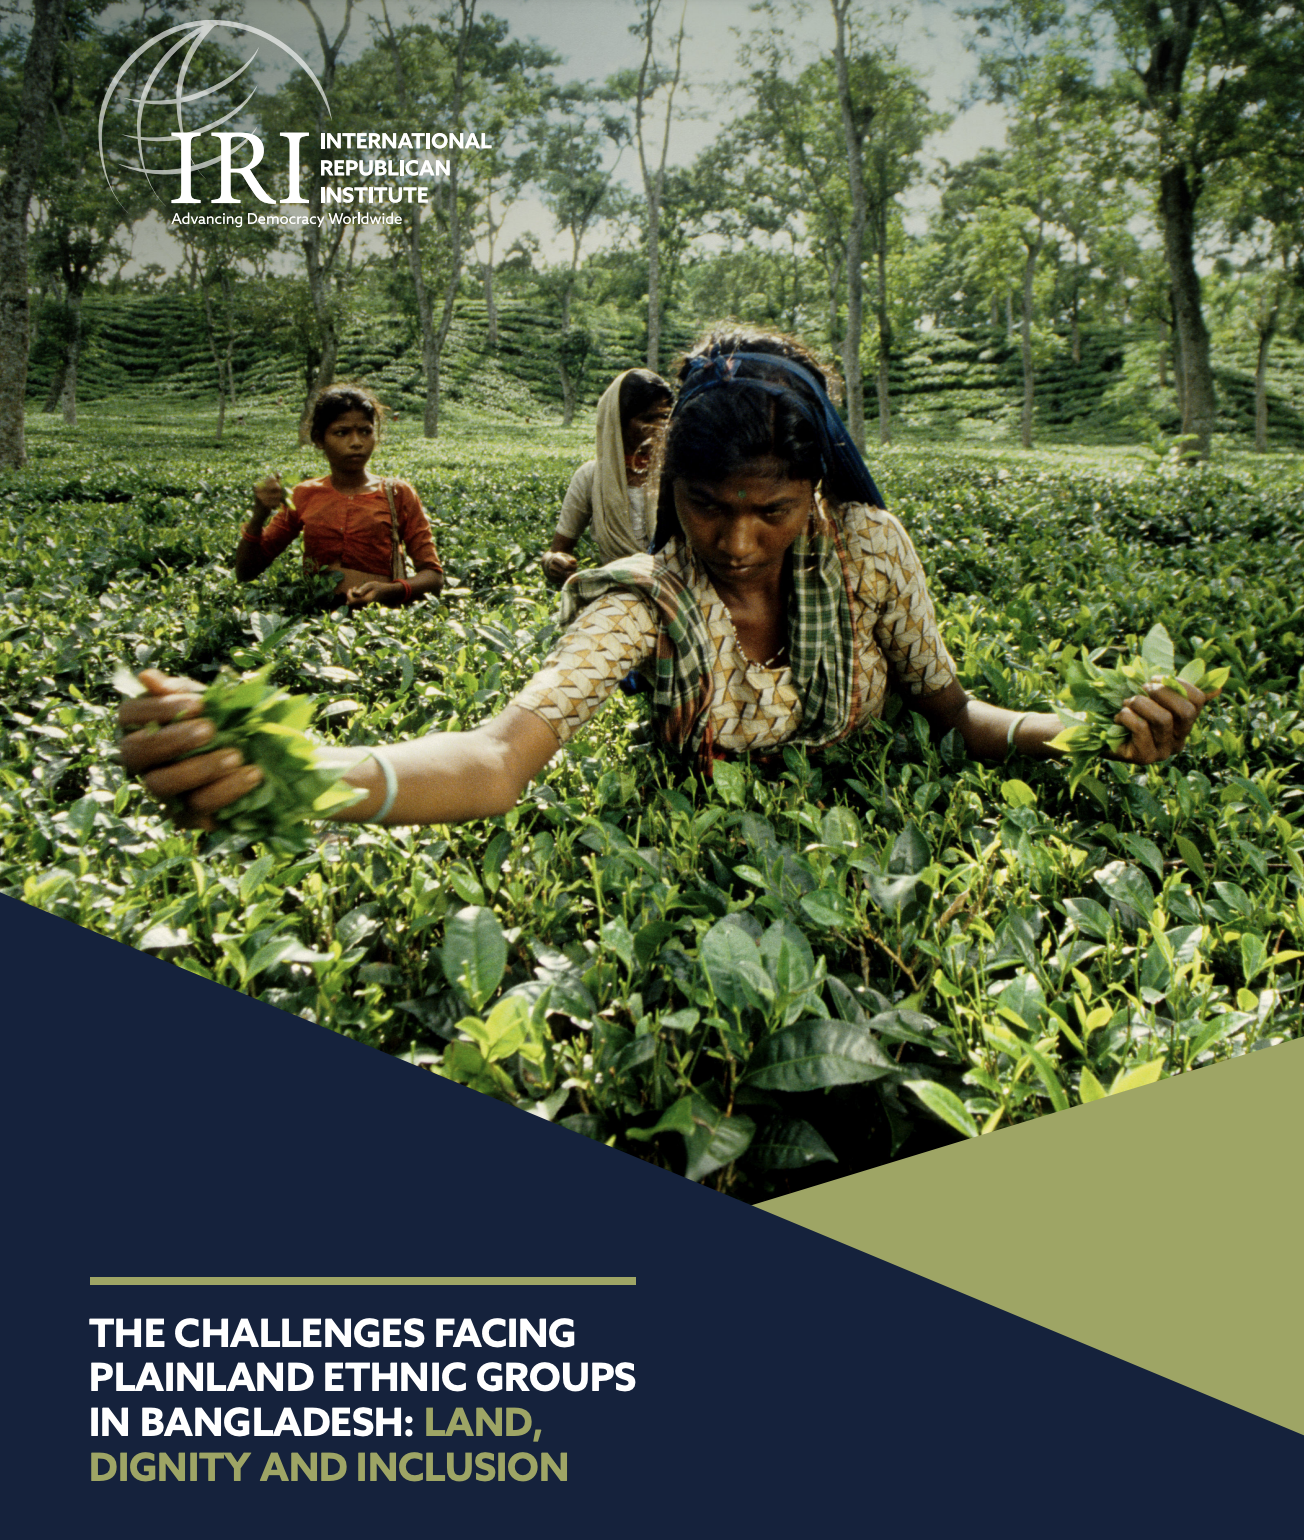 THE CHALLENGES FACING PLAINLAND ETHNIC GROUPS IN BANGLADESH: LAND, DIGNITY AND INCLUSION